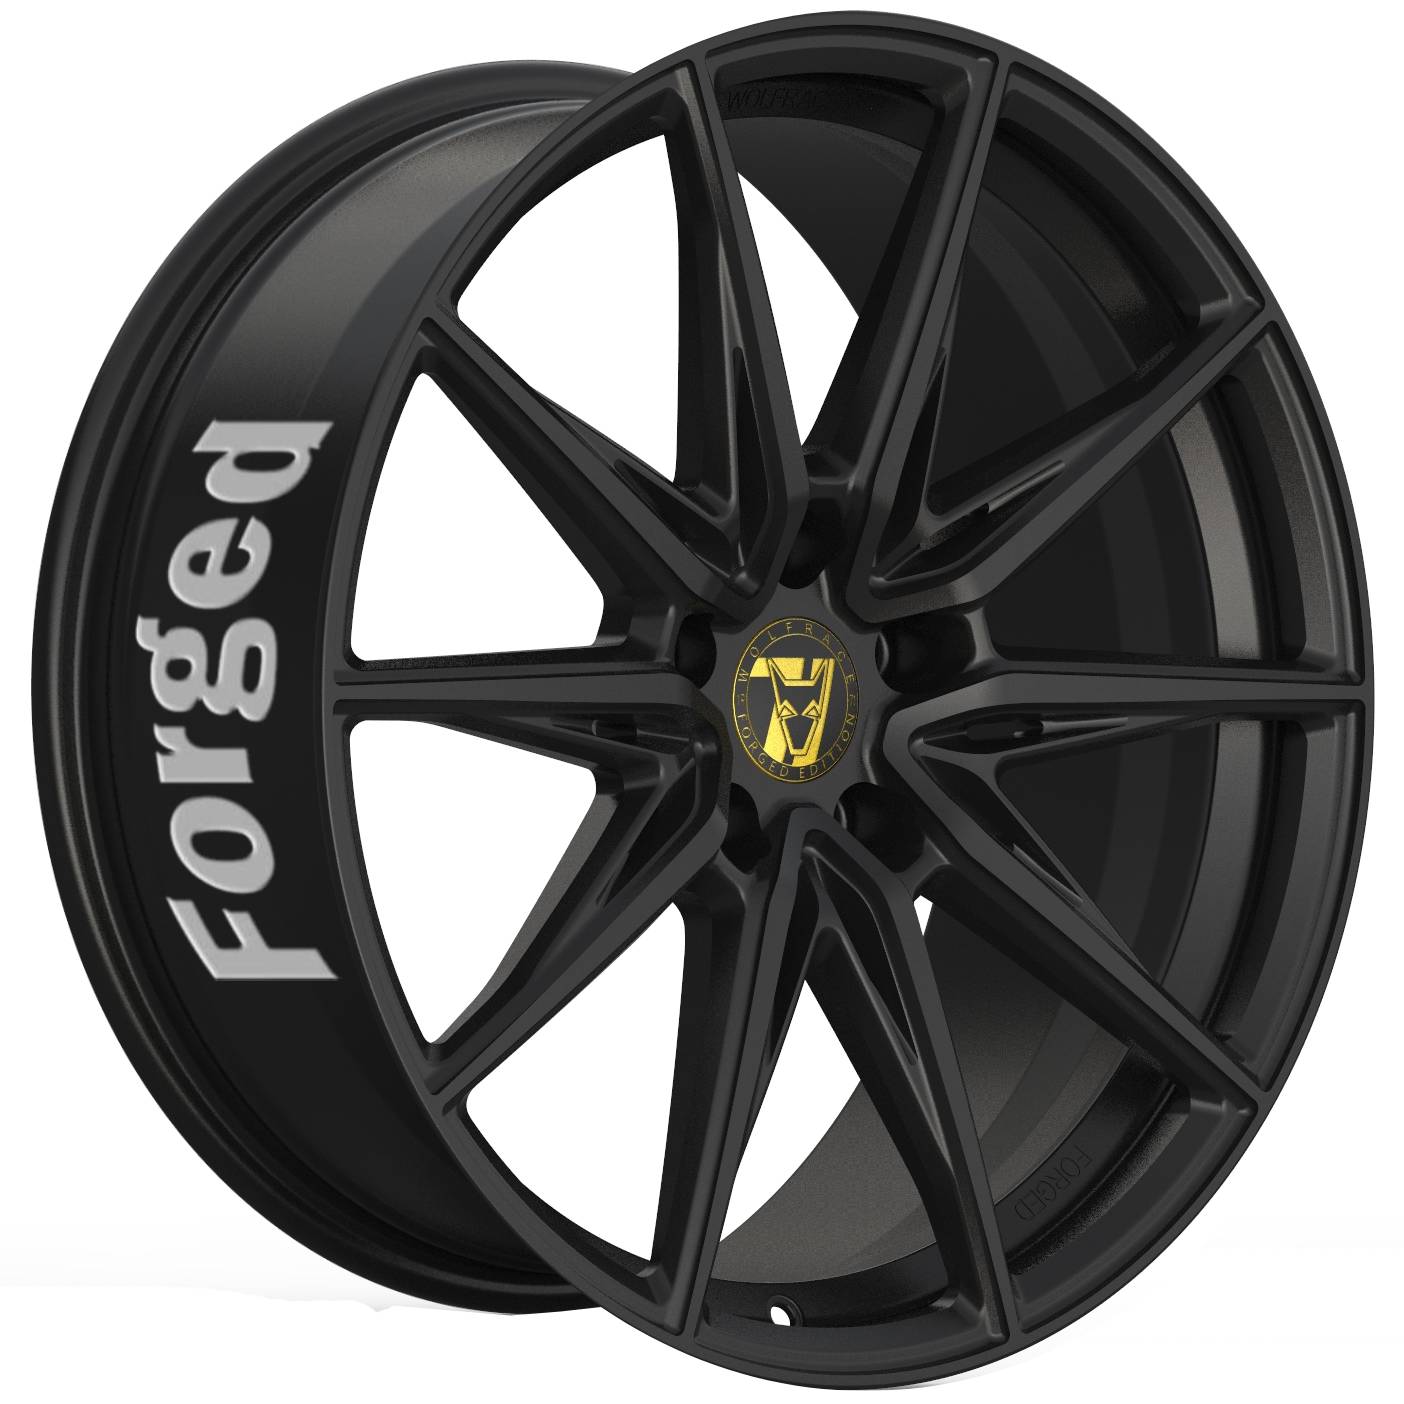 Jantes alu Demon Wheels 71 Forged Edition Urban Racer Forged [10x20] -5x112- ET 35